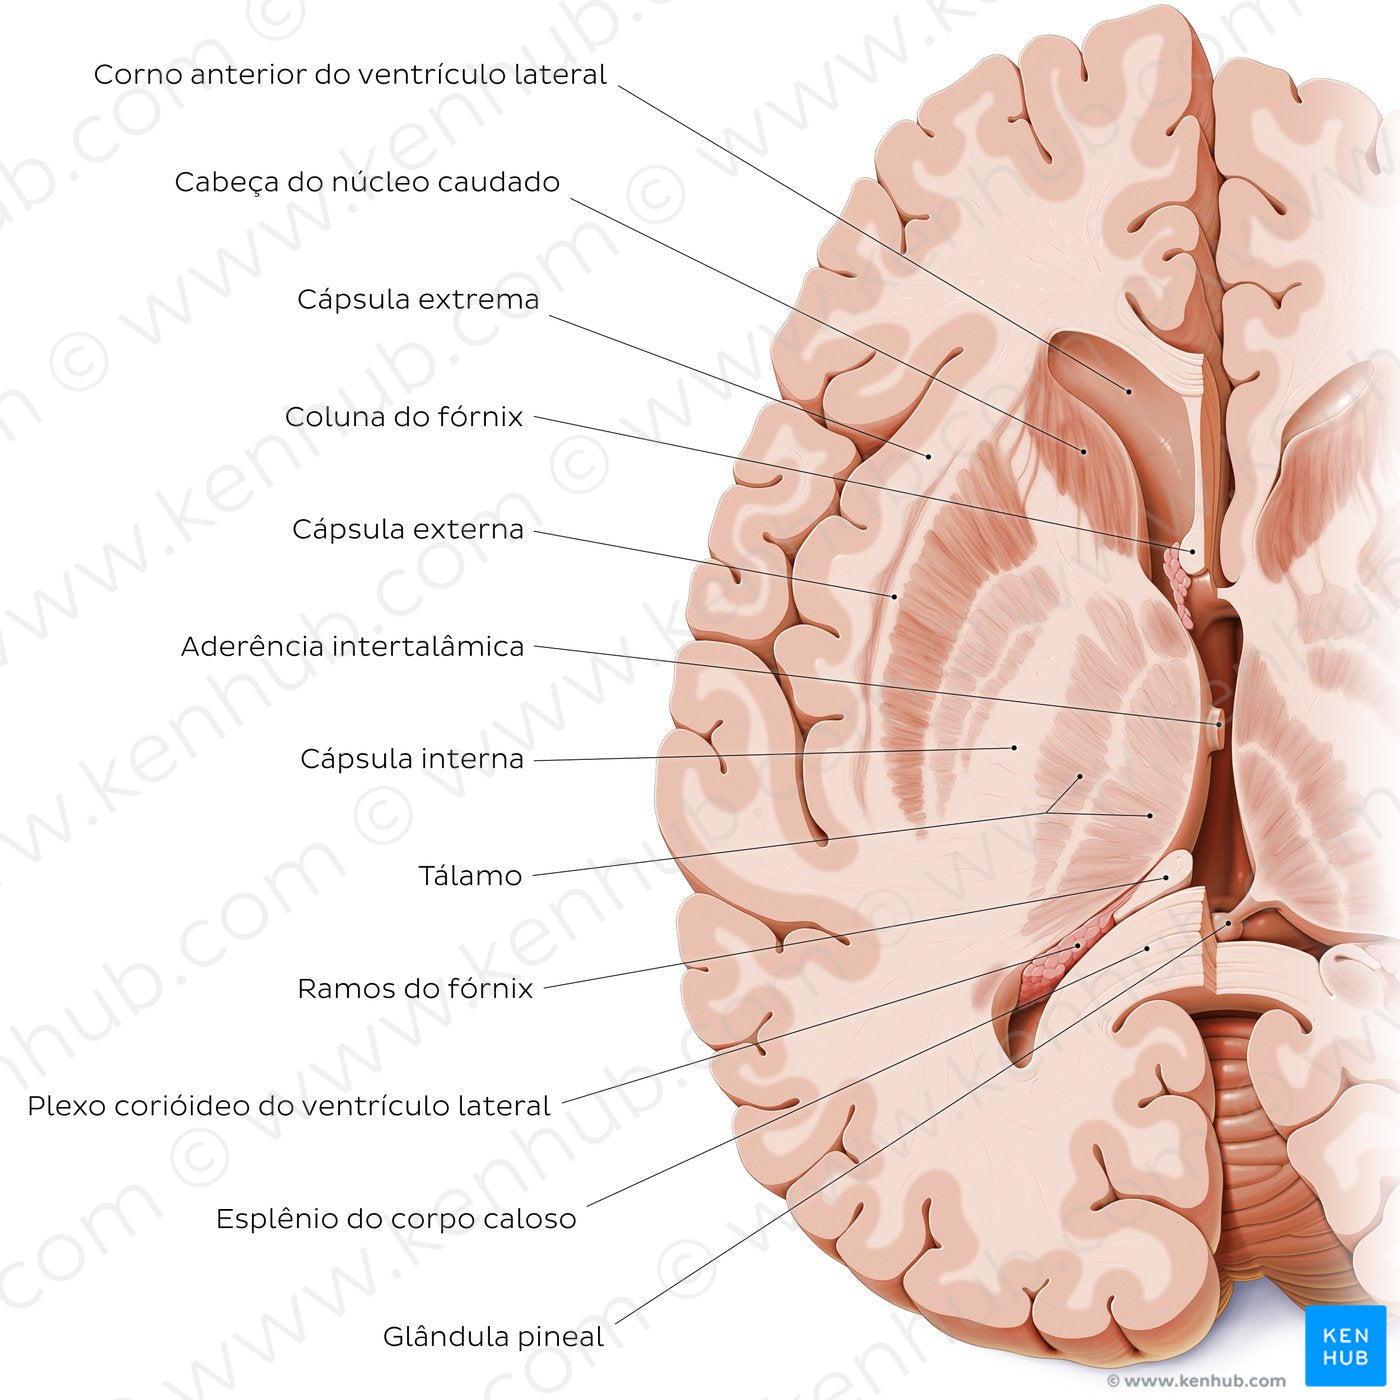 Horizontal section of the brain: Section A (Portuguese)